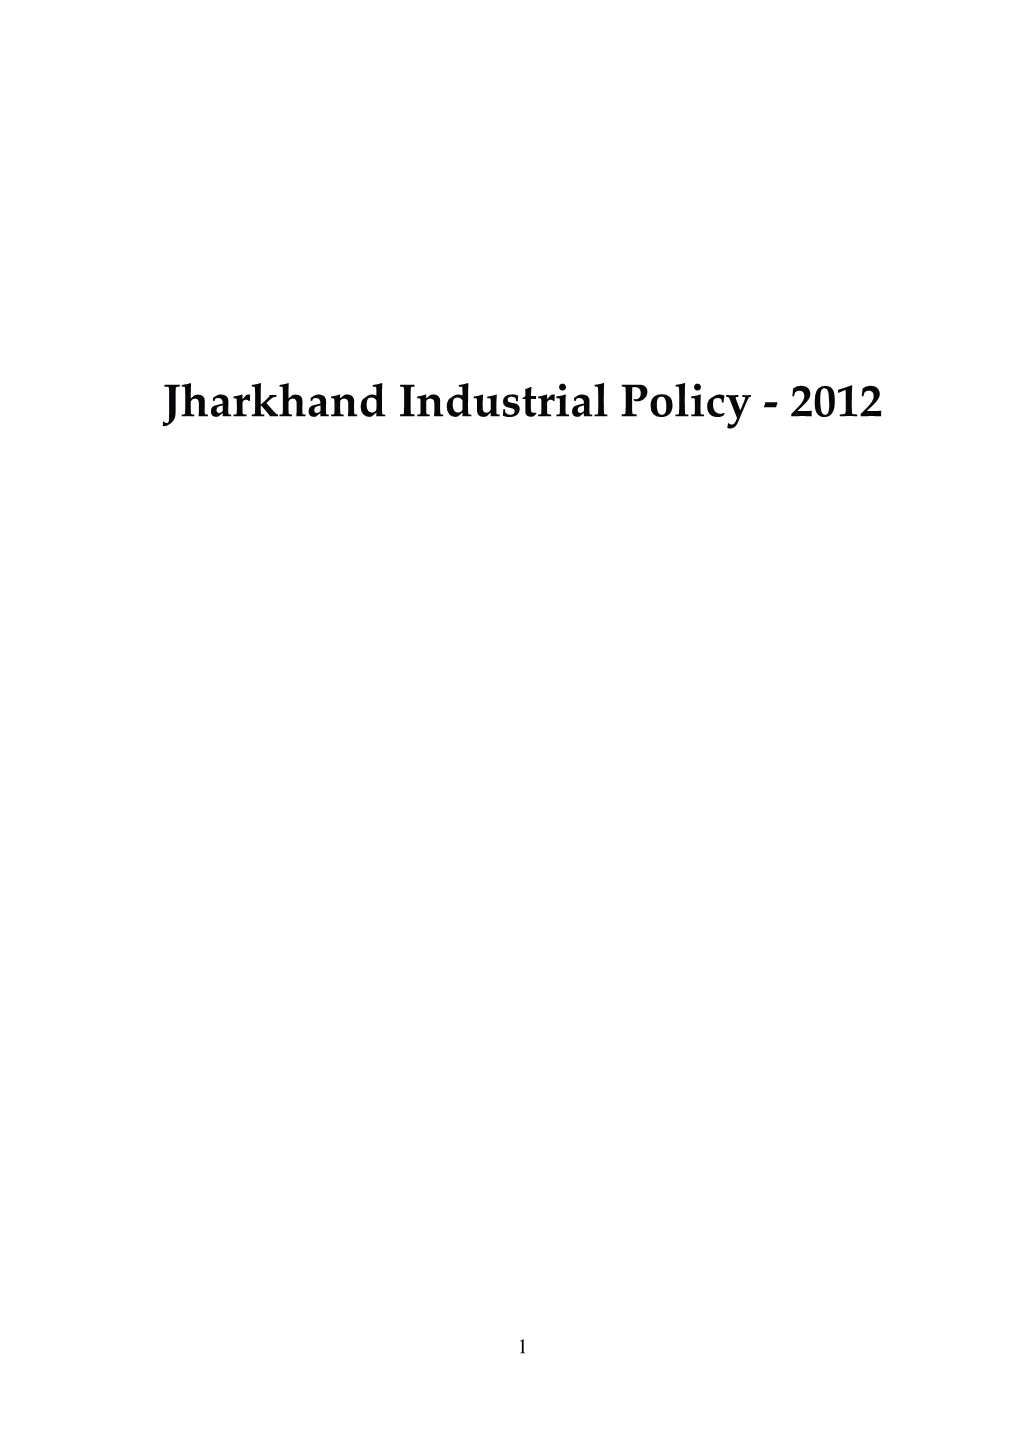 Jharkhand Industrial Policy - 2012